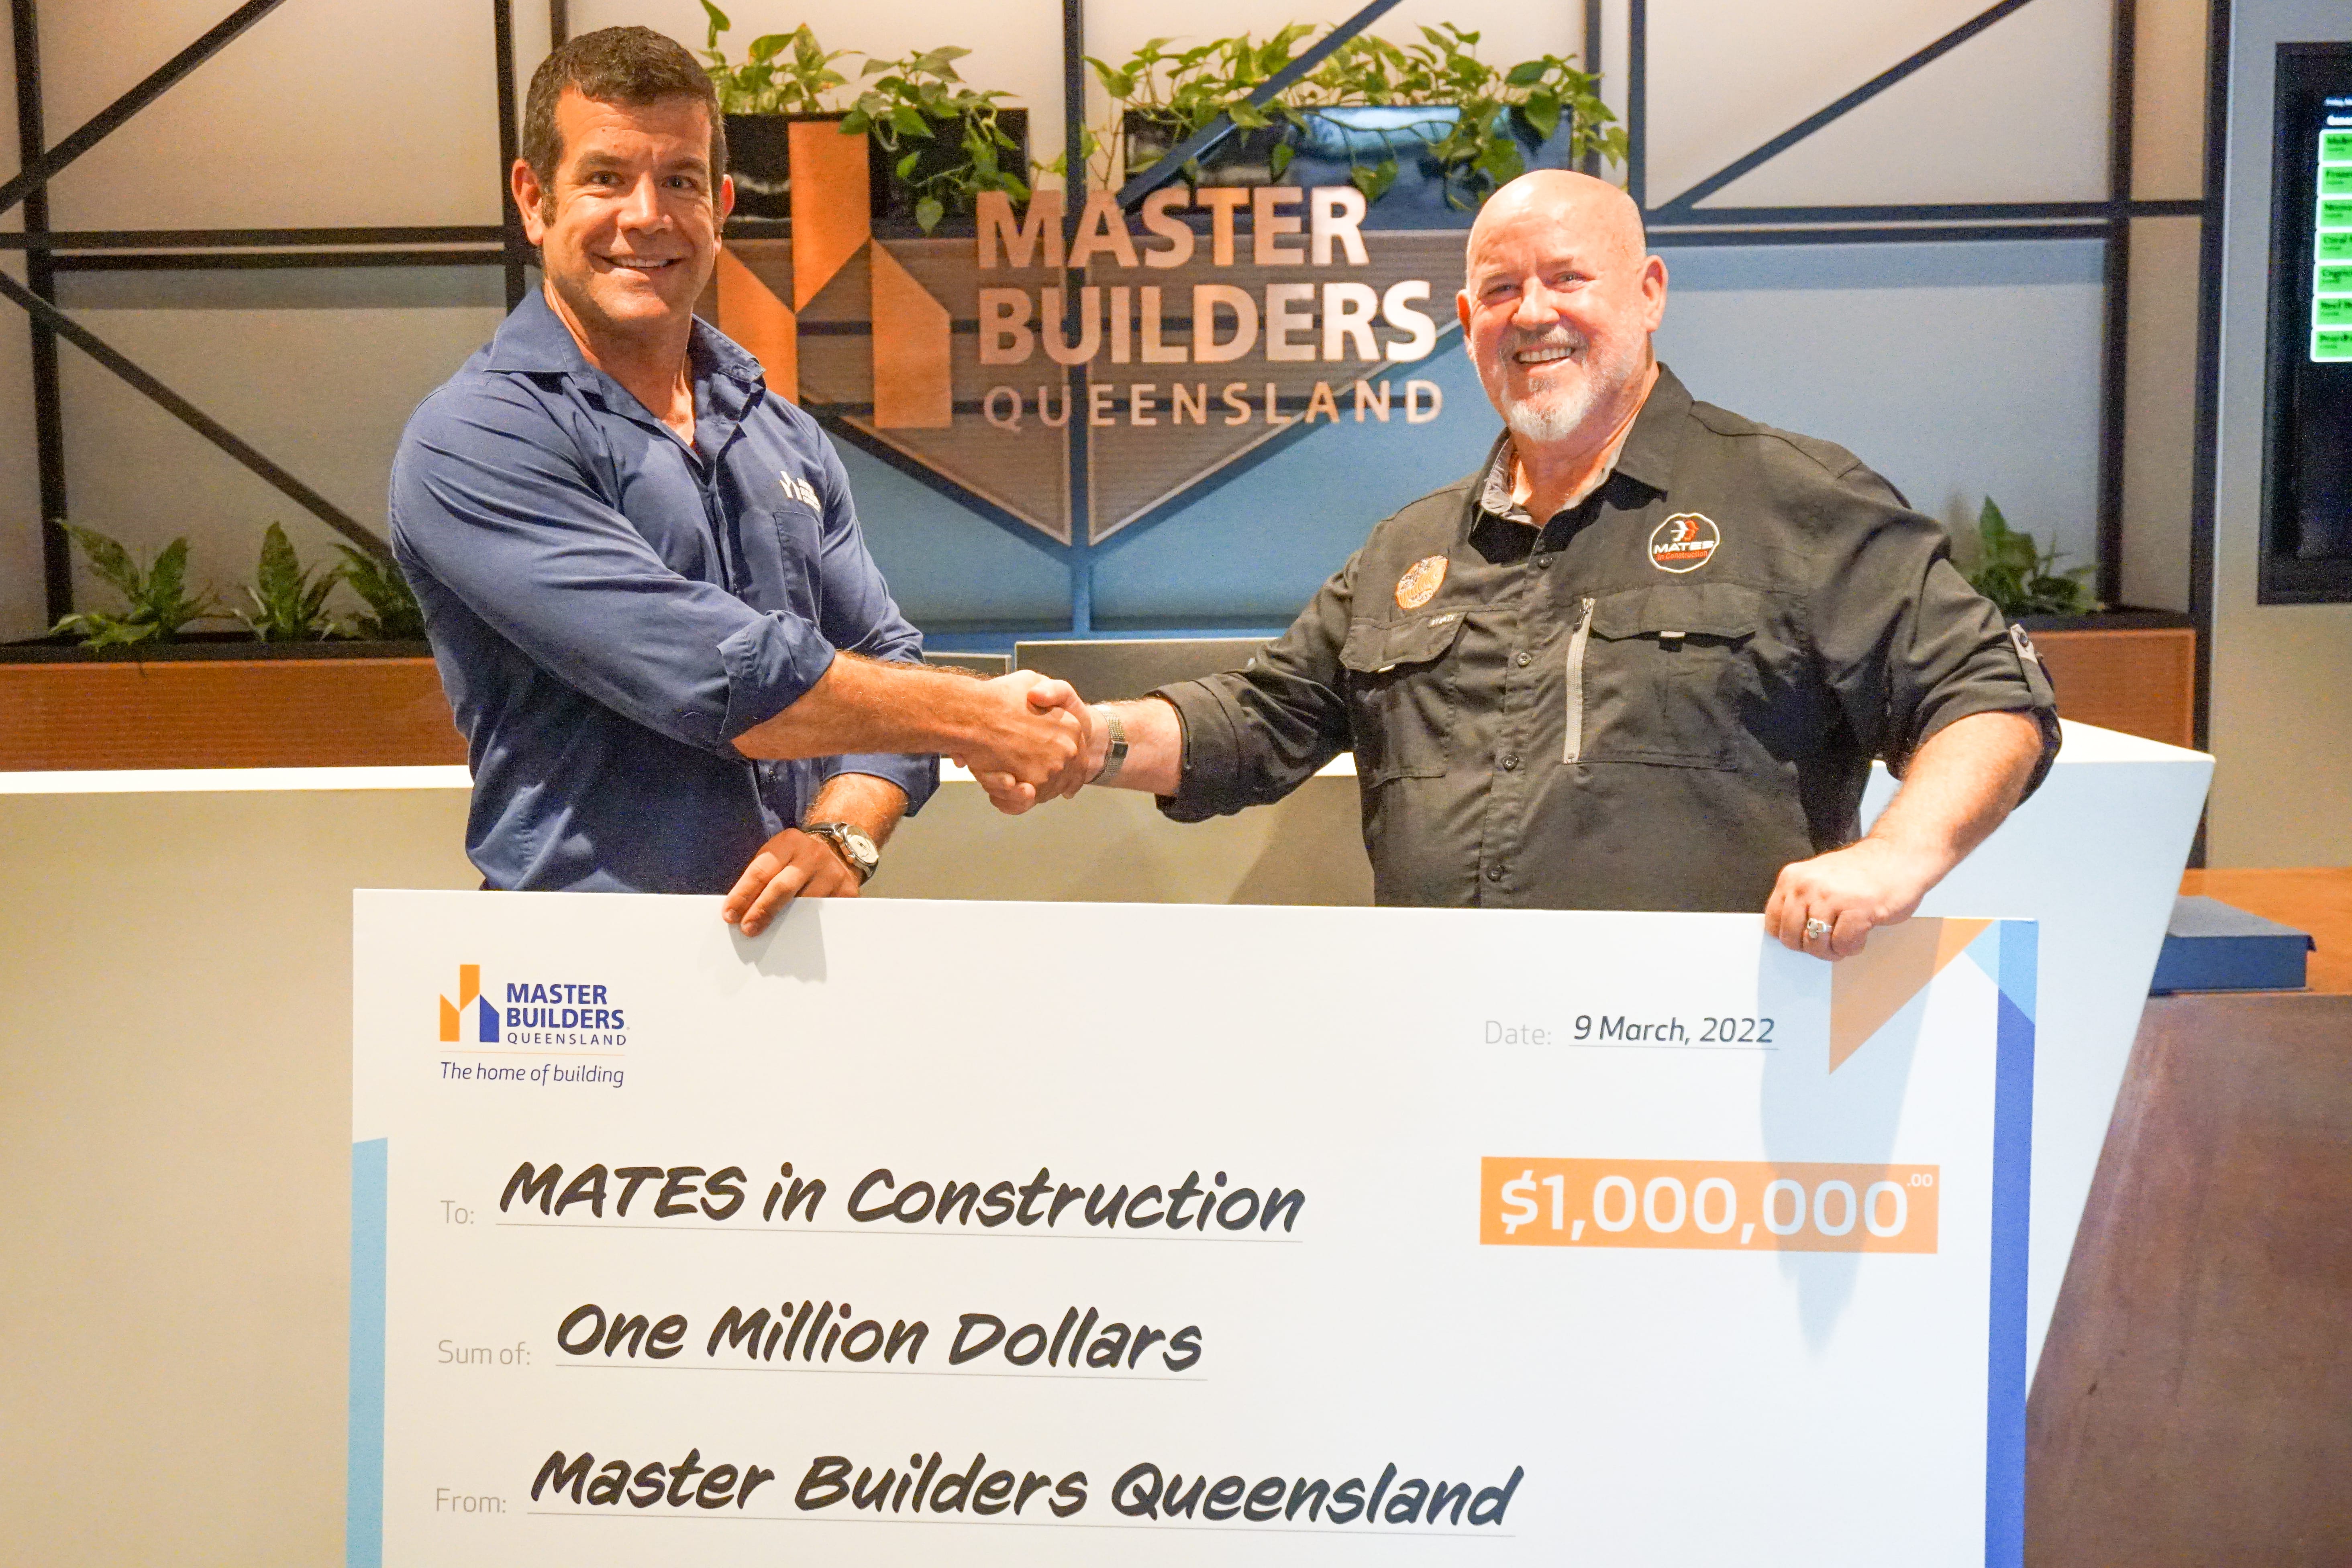 Master Builders QLD donates to MATES